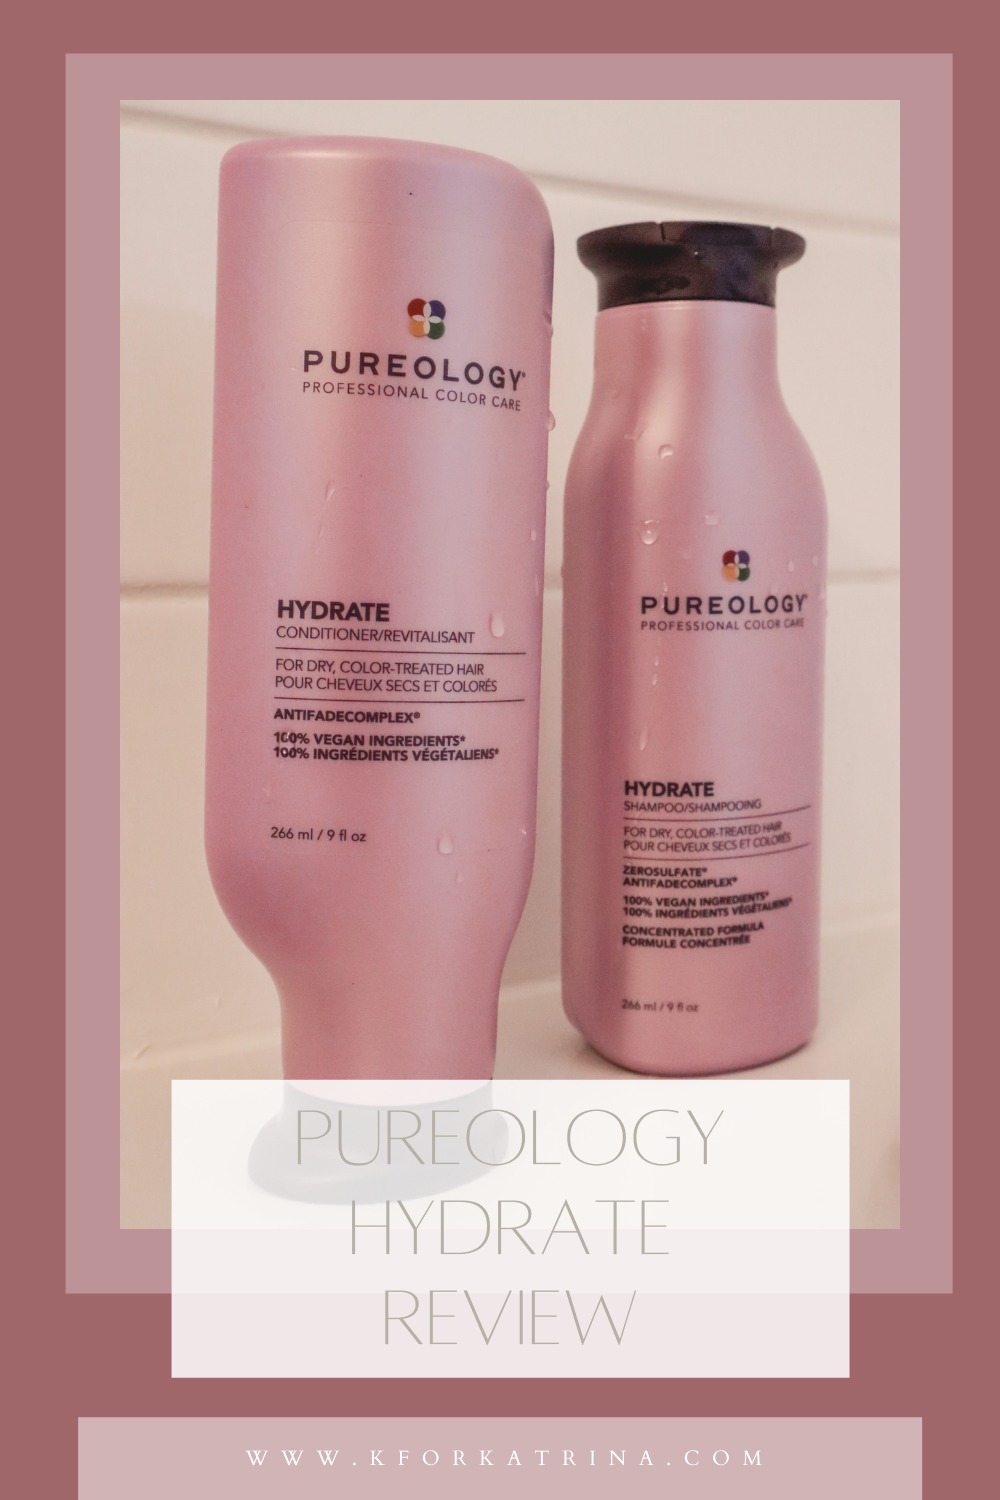 Pureology Hydrate Shampoo and Conditioner Review - K for Katrina